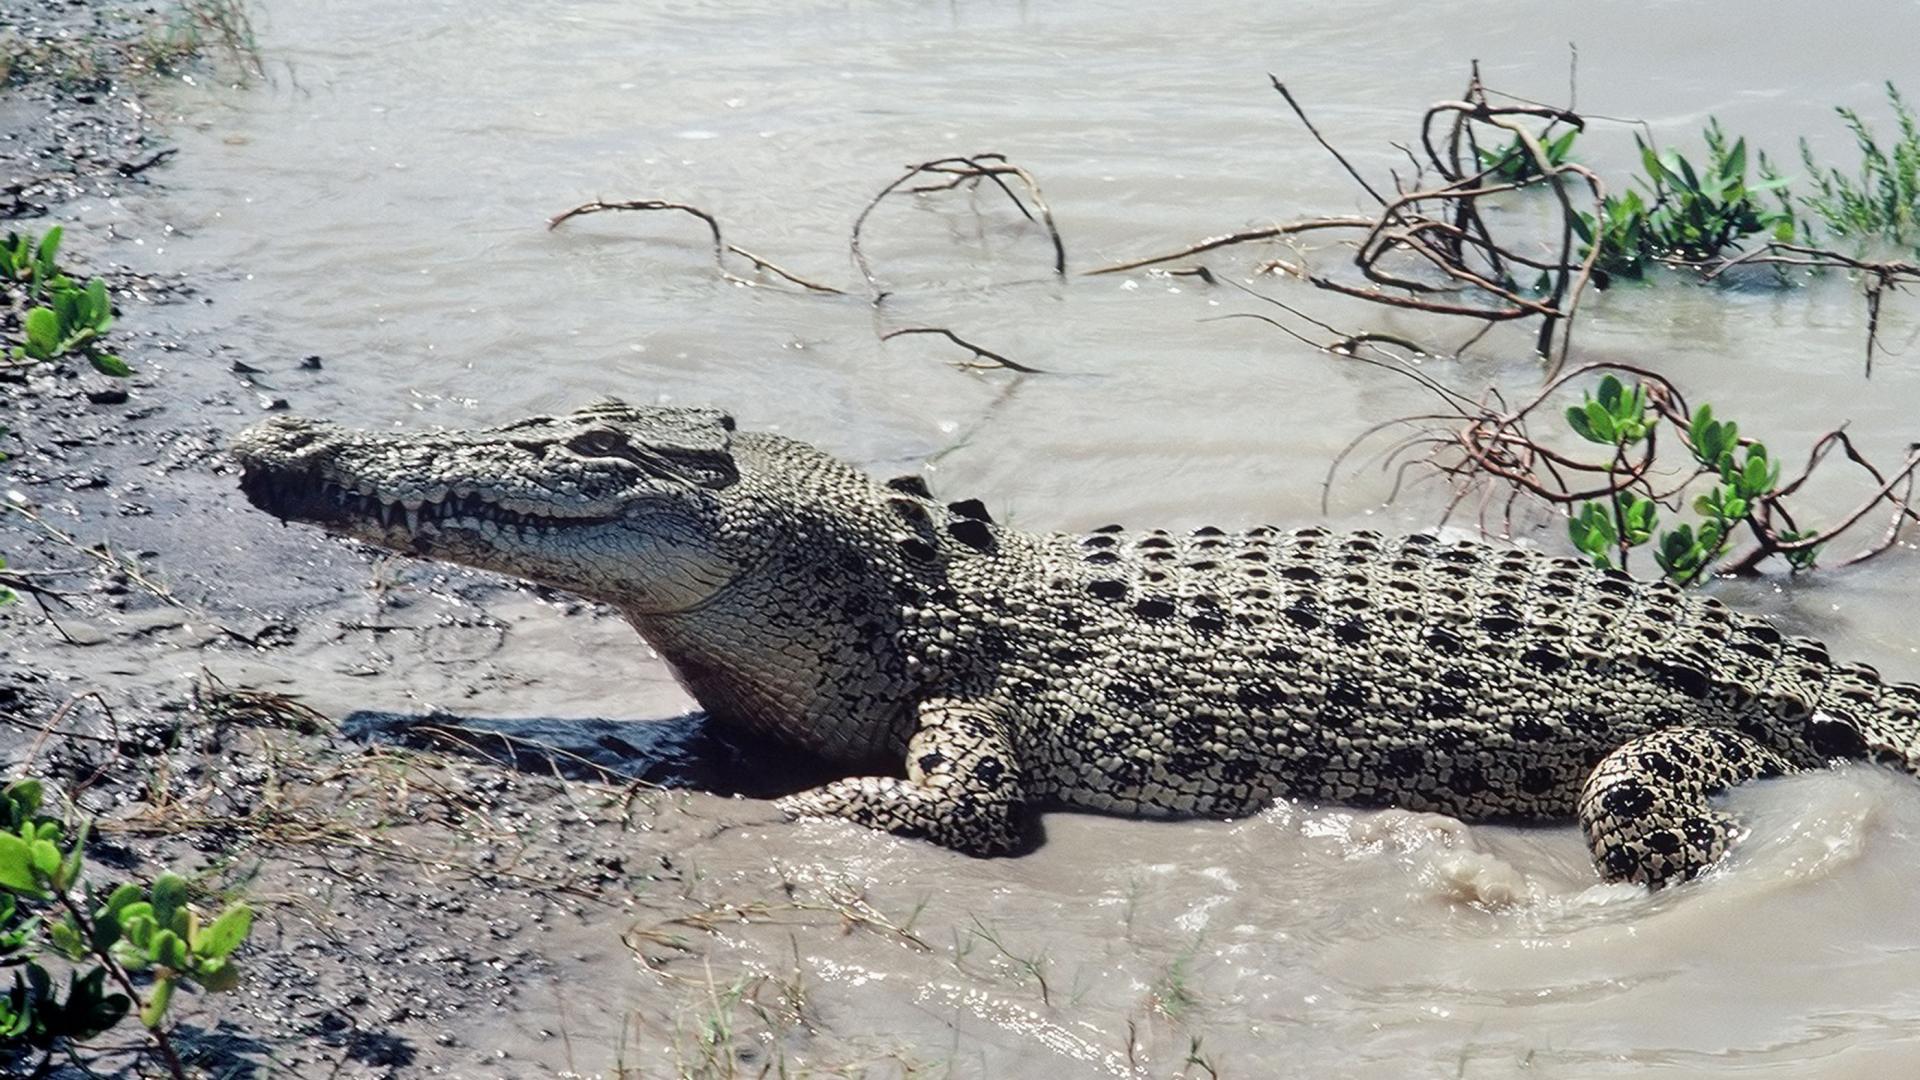 Crocs remain both a Risk and at Risk in Sabah